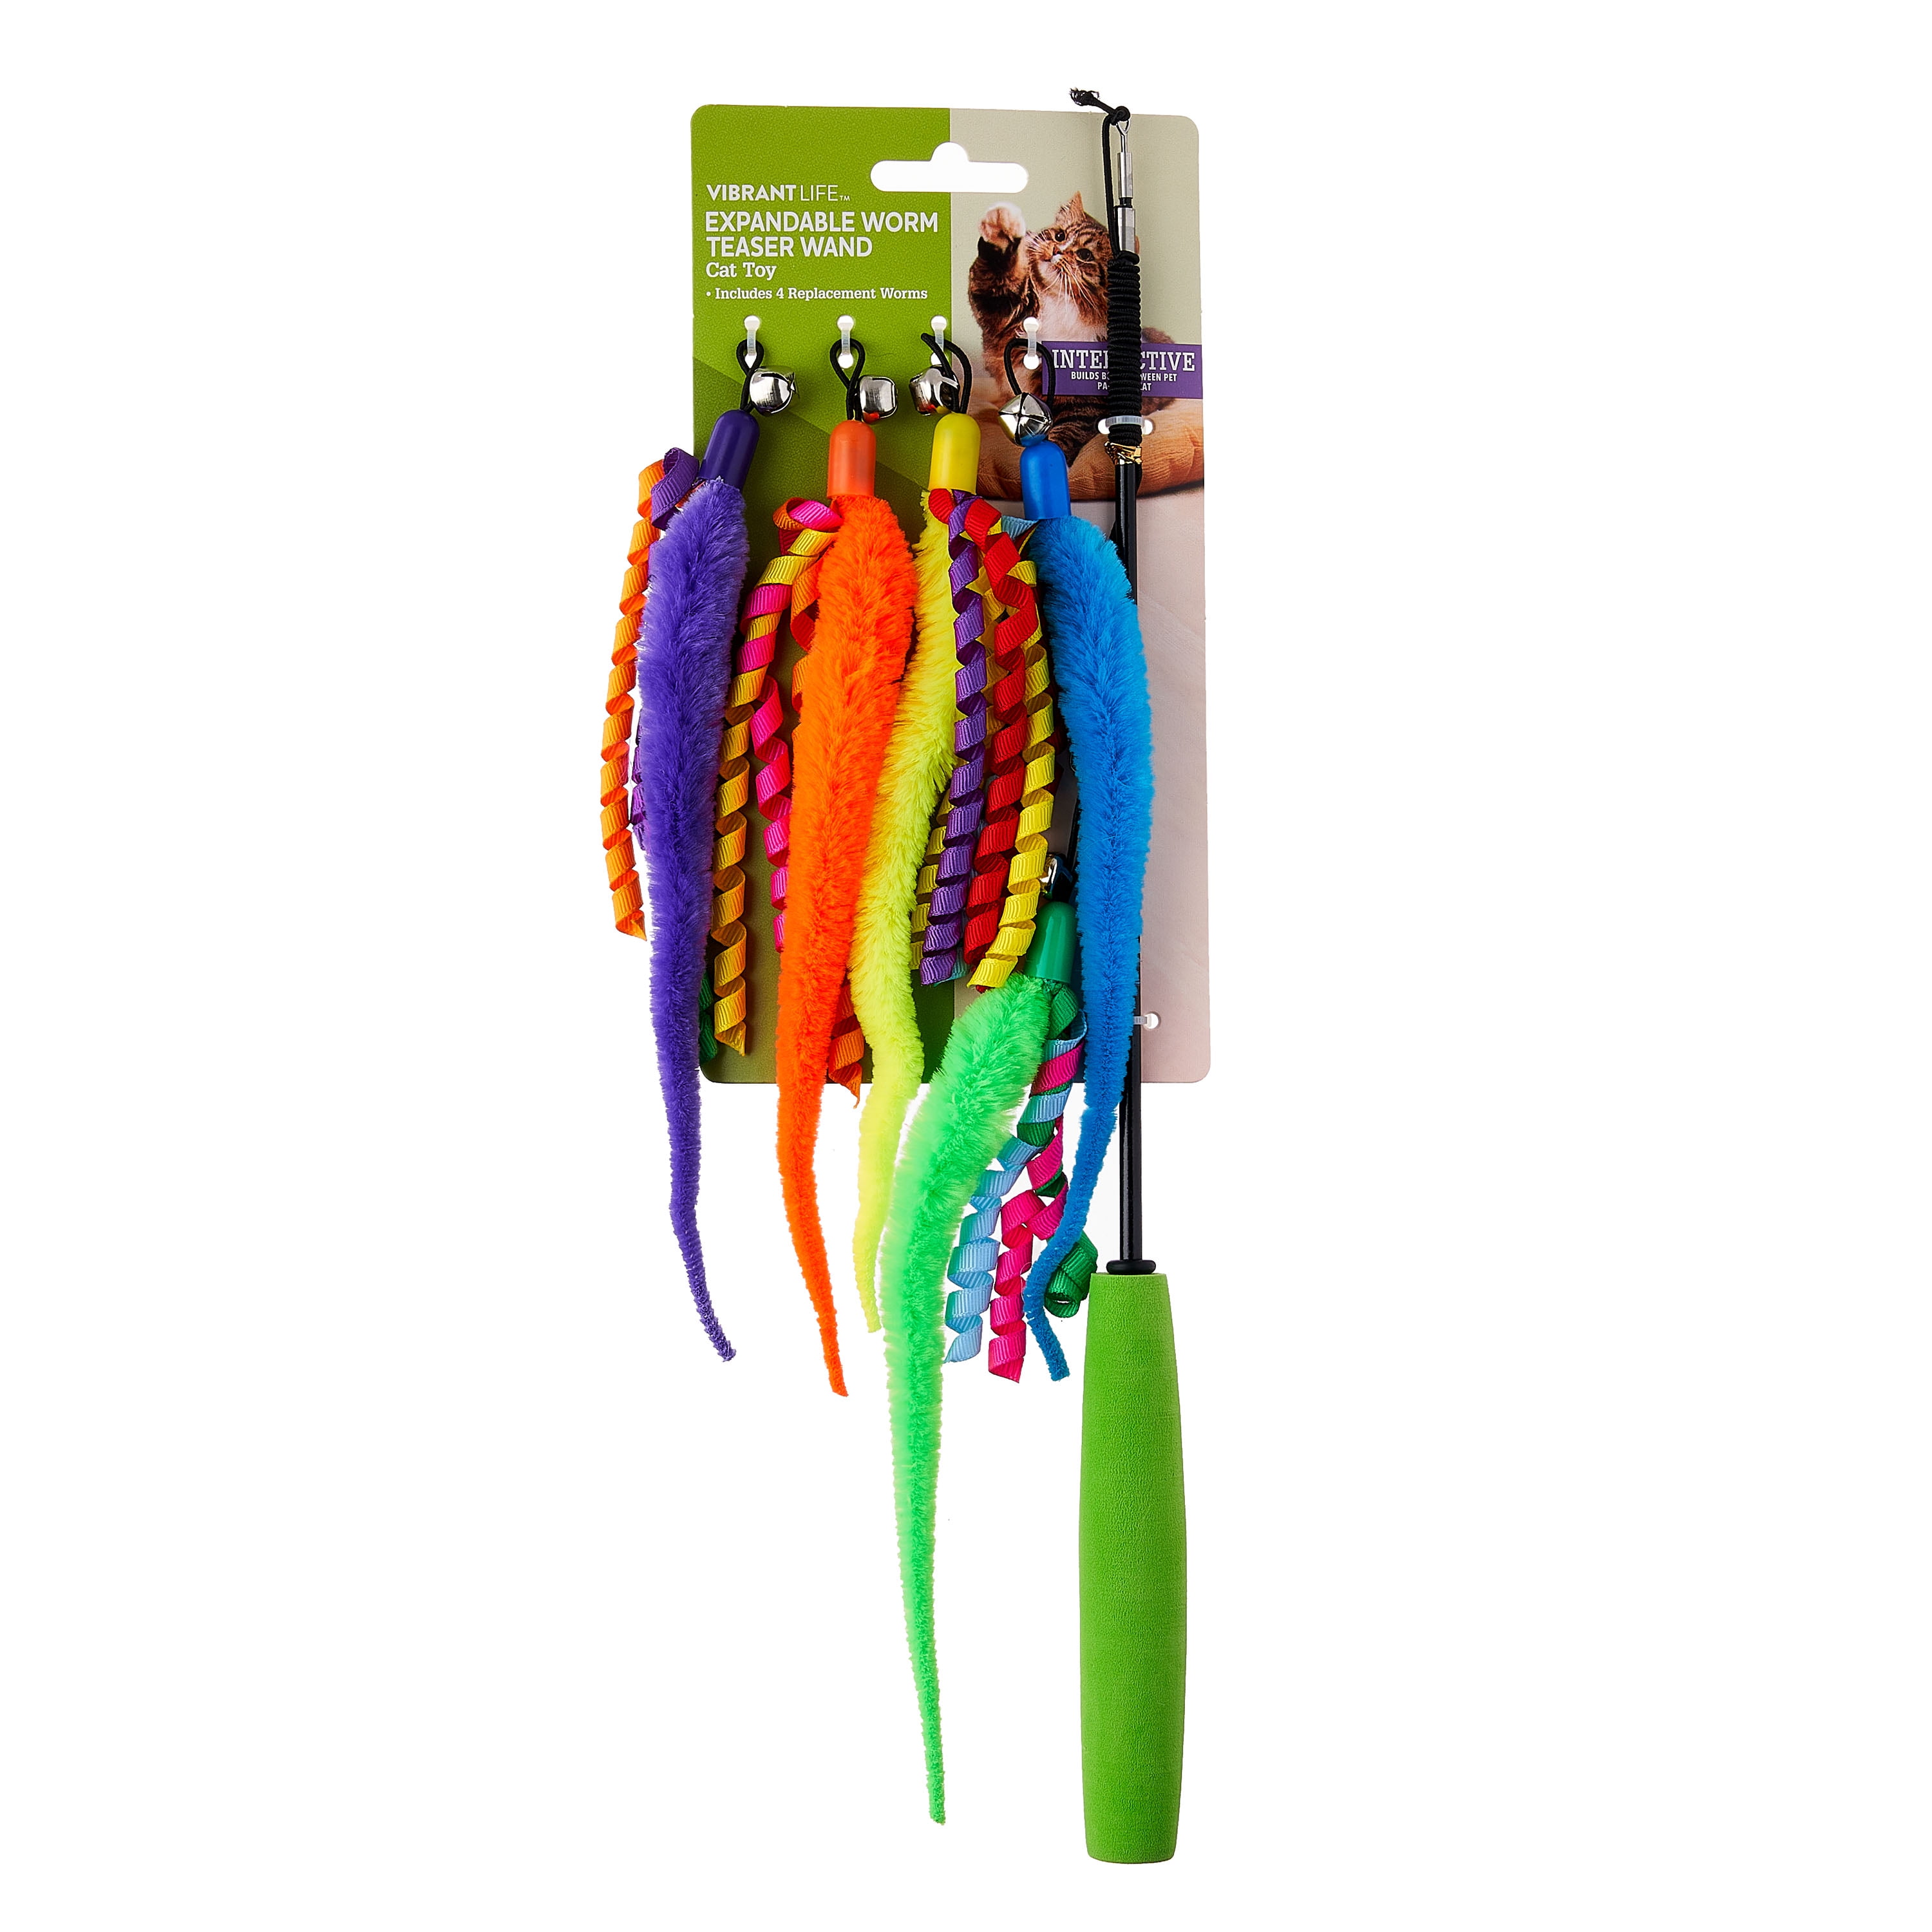 Vibrant Life Expandable Worm Teaser Wand Cat Toy